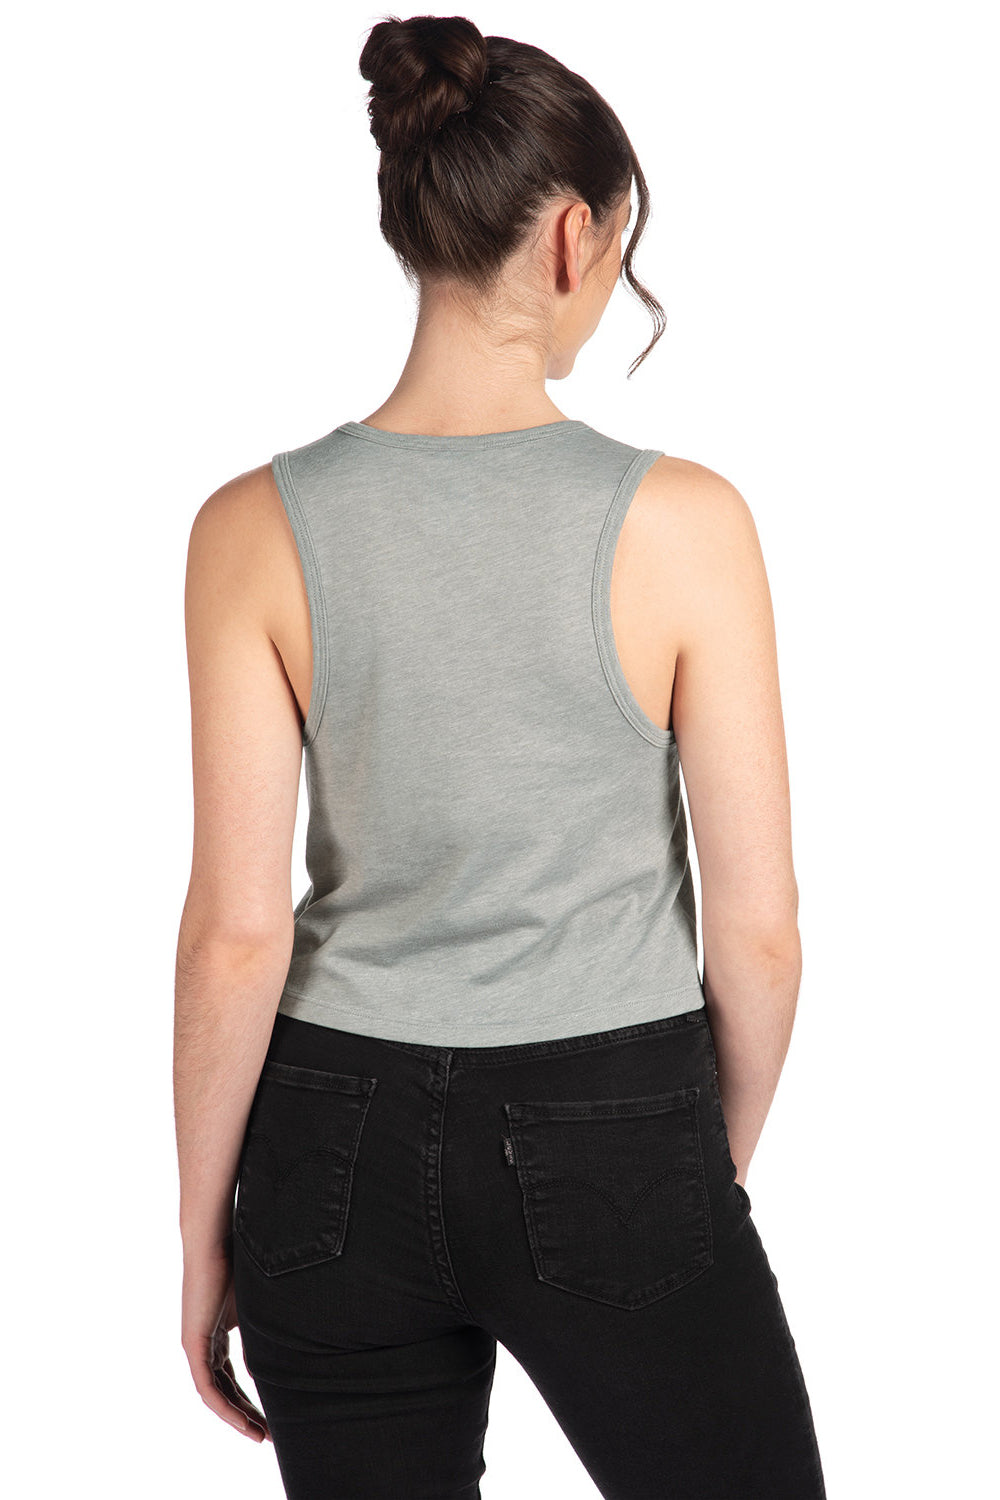 Next Level 5083 Womens Festival Cropped Tank Top Heather Grey Back